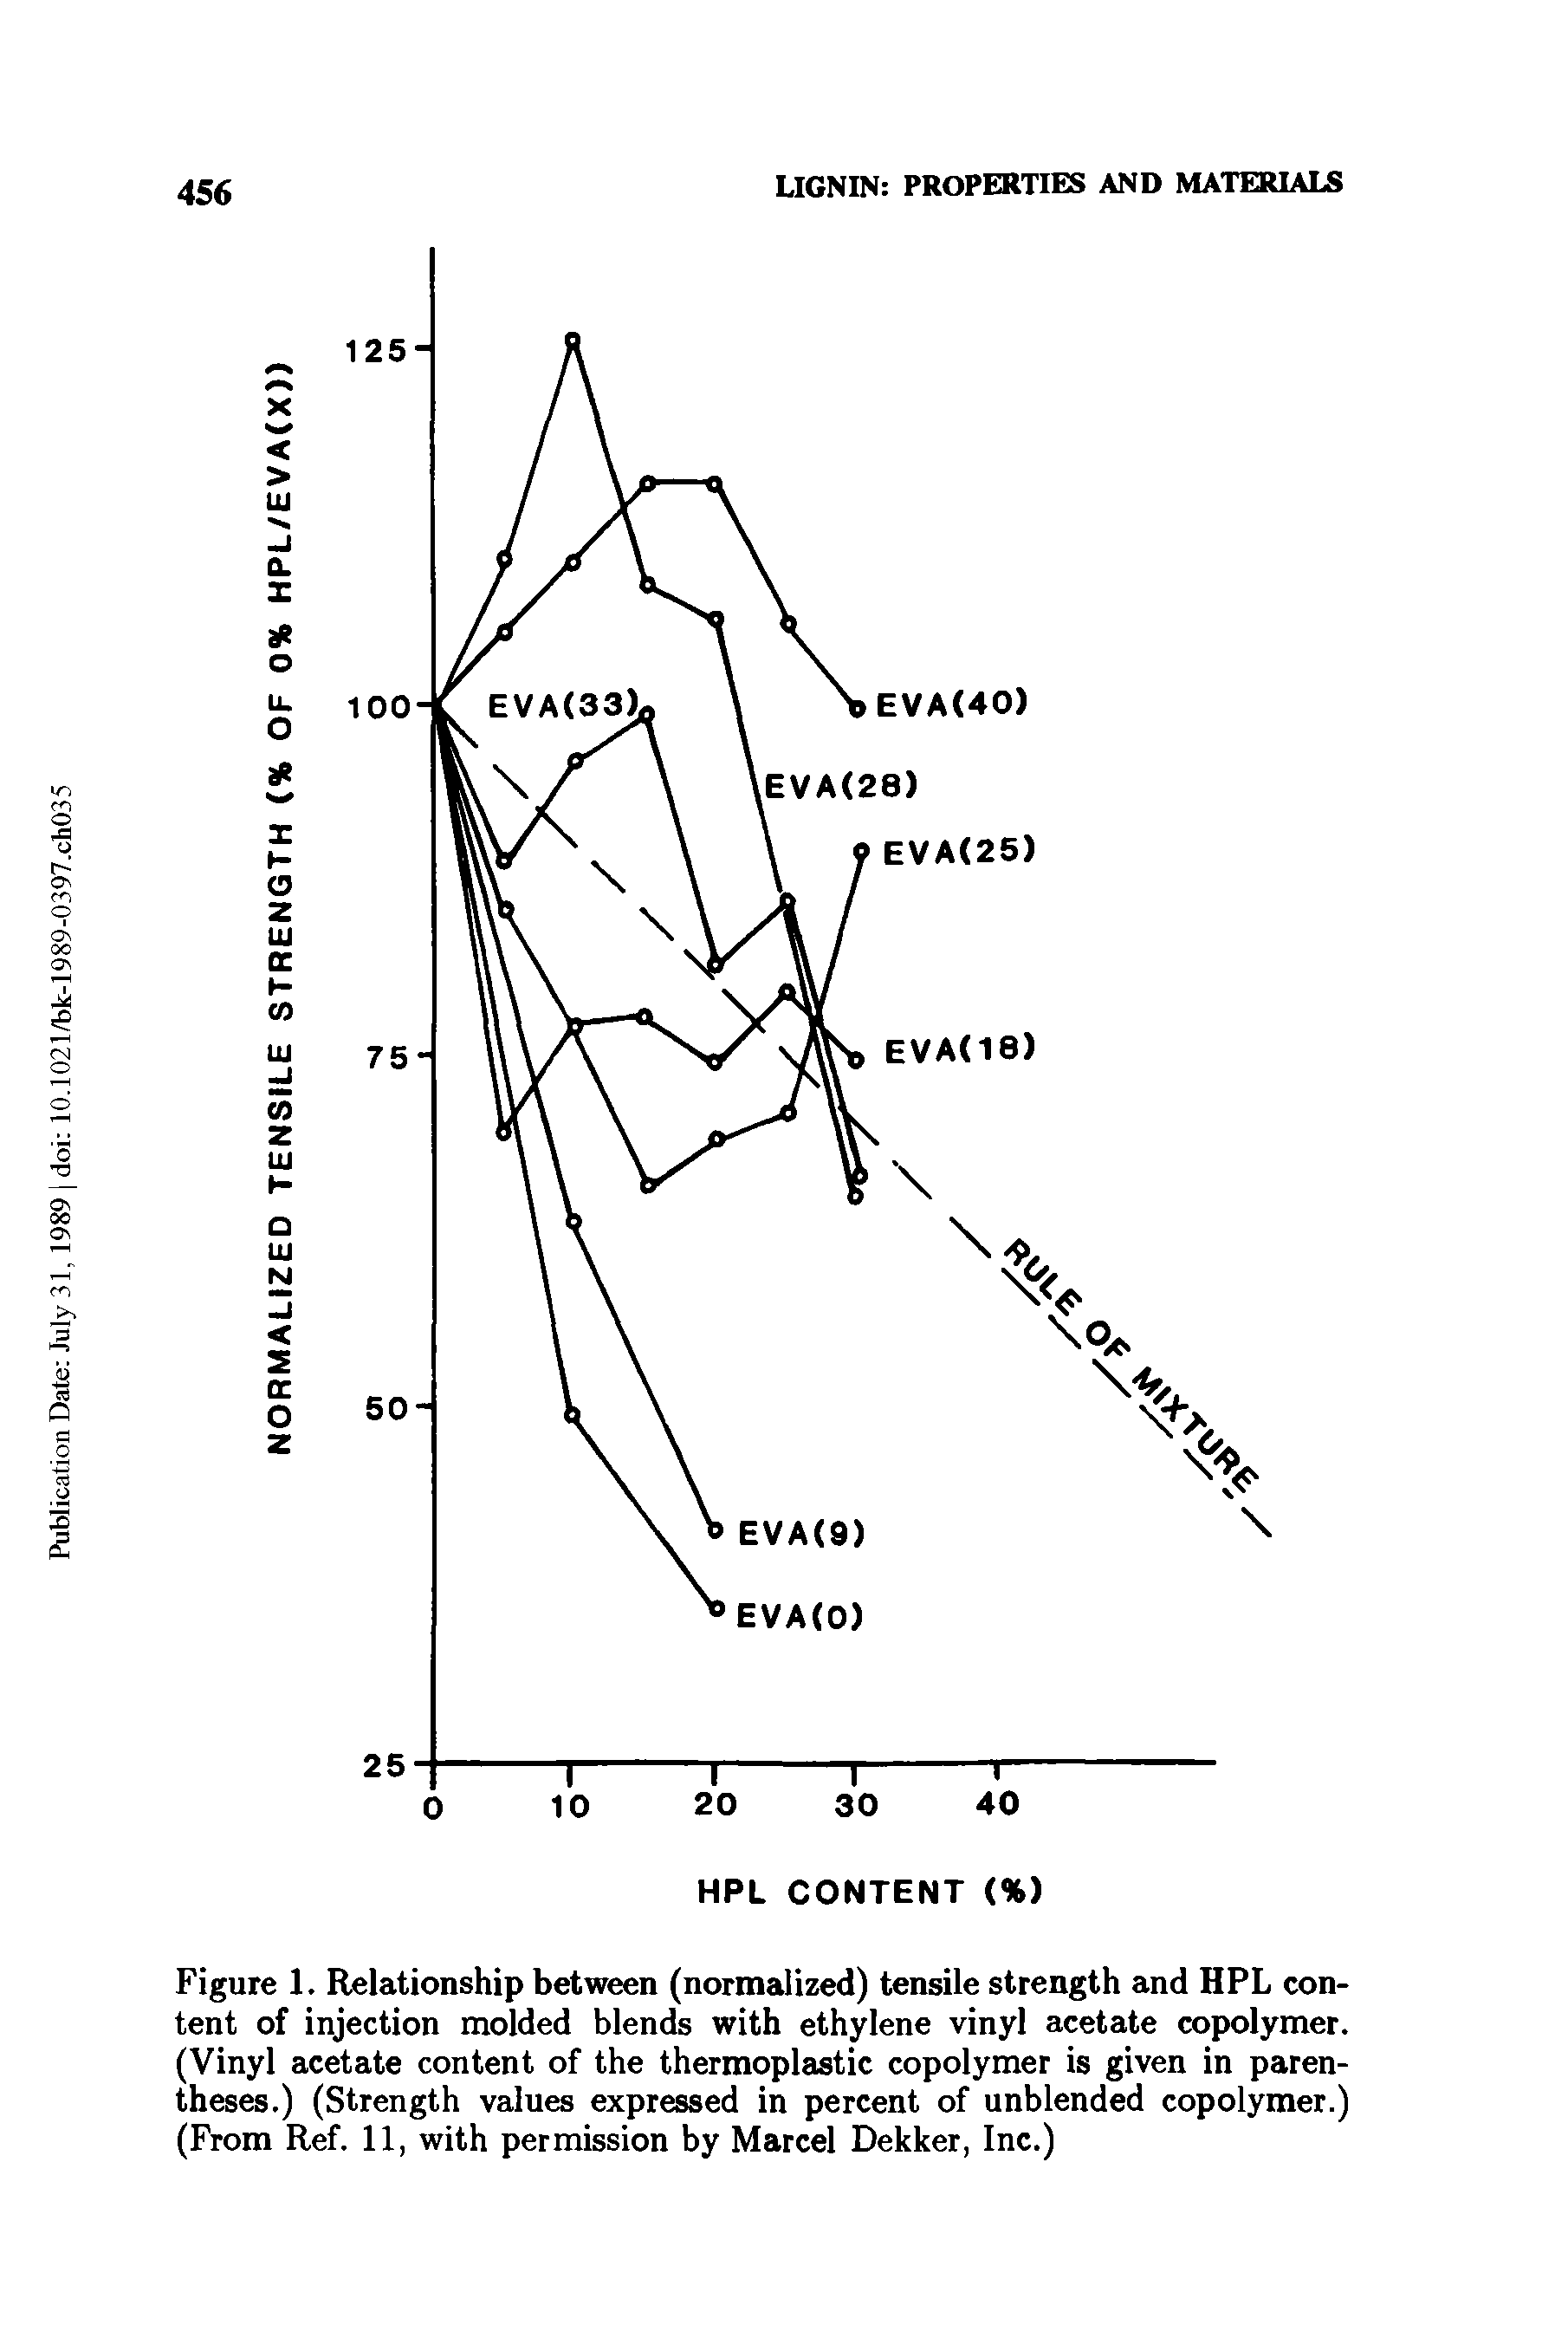 Figure 1. Relationship between (normalized) tensile strength and HPL content of injection molded blends with ethylene vinyl acetate copolymer. (Vinyl acetate content of the thermoplastic copolymer is given in parentheses.) (Strength values expressed in percent of unblended copolymer.) (From Ref. 11, with permission by Marcel Dekker, Inc.)...